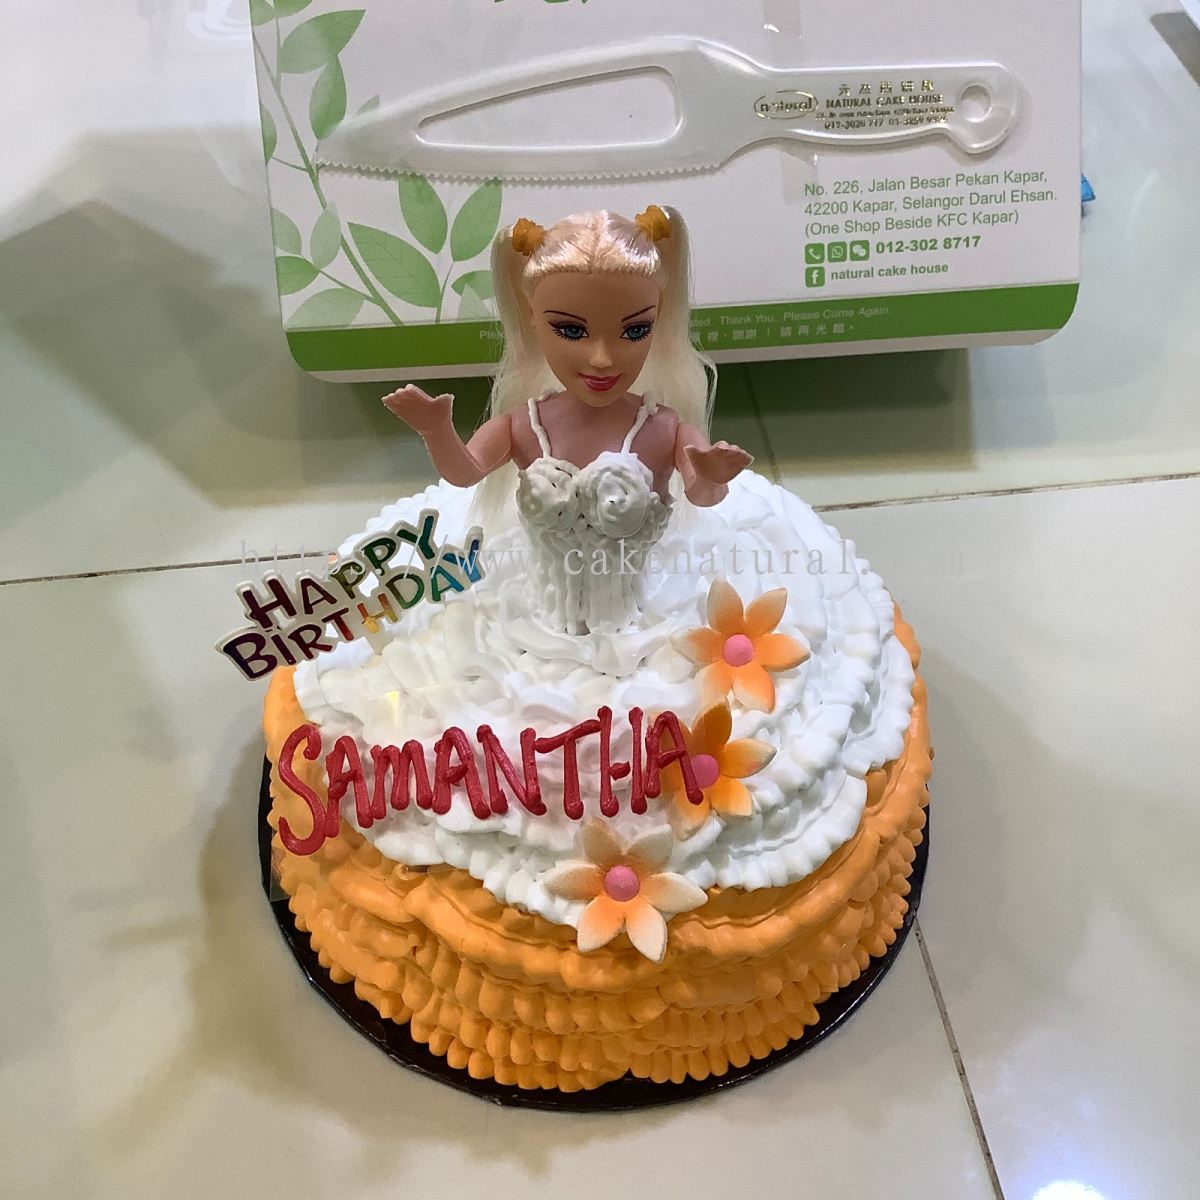 Details more than 67 anabia birthday cake images super hot -  awesomeenglish.edu.vn